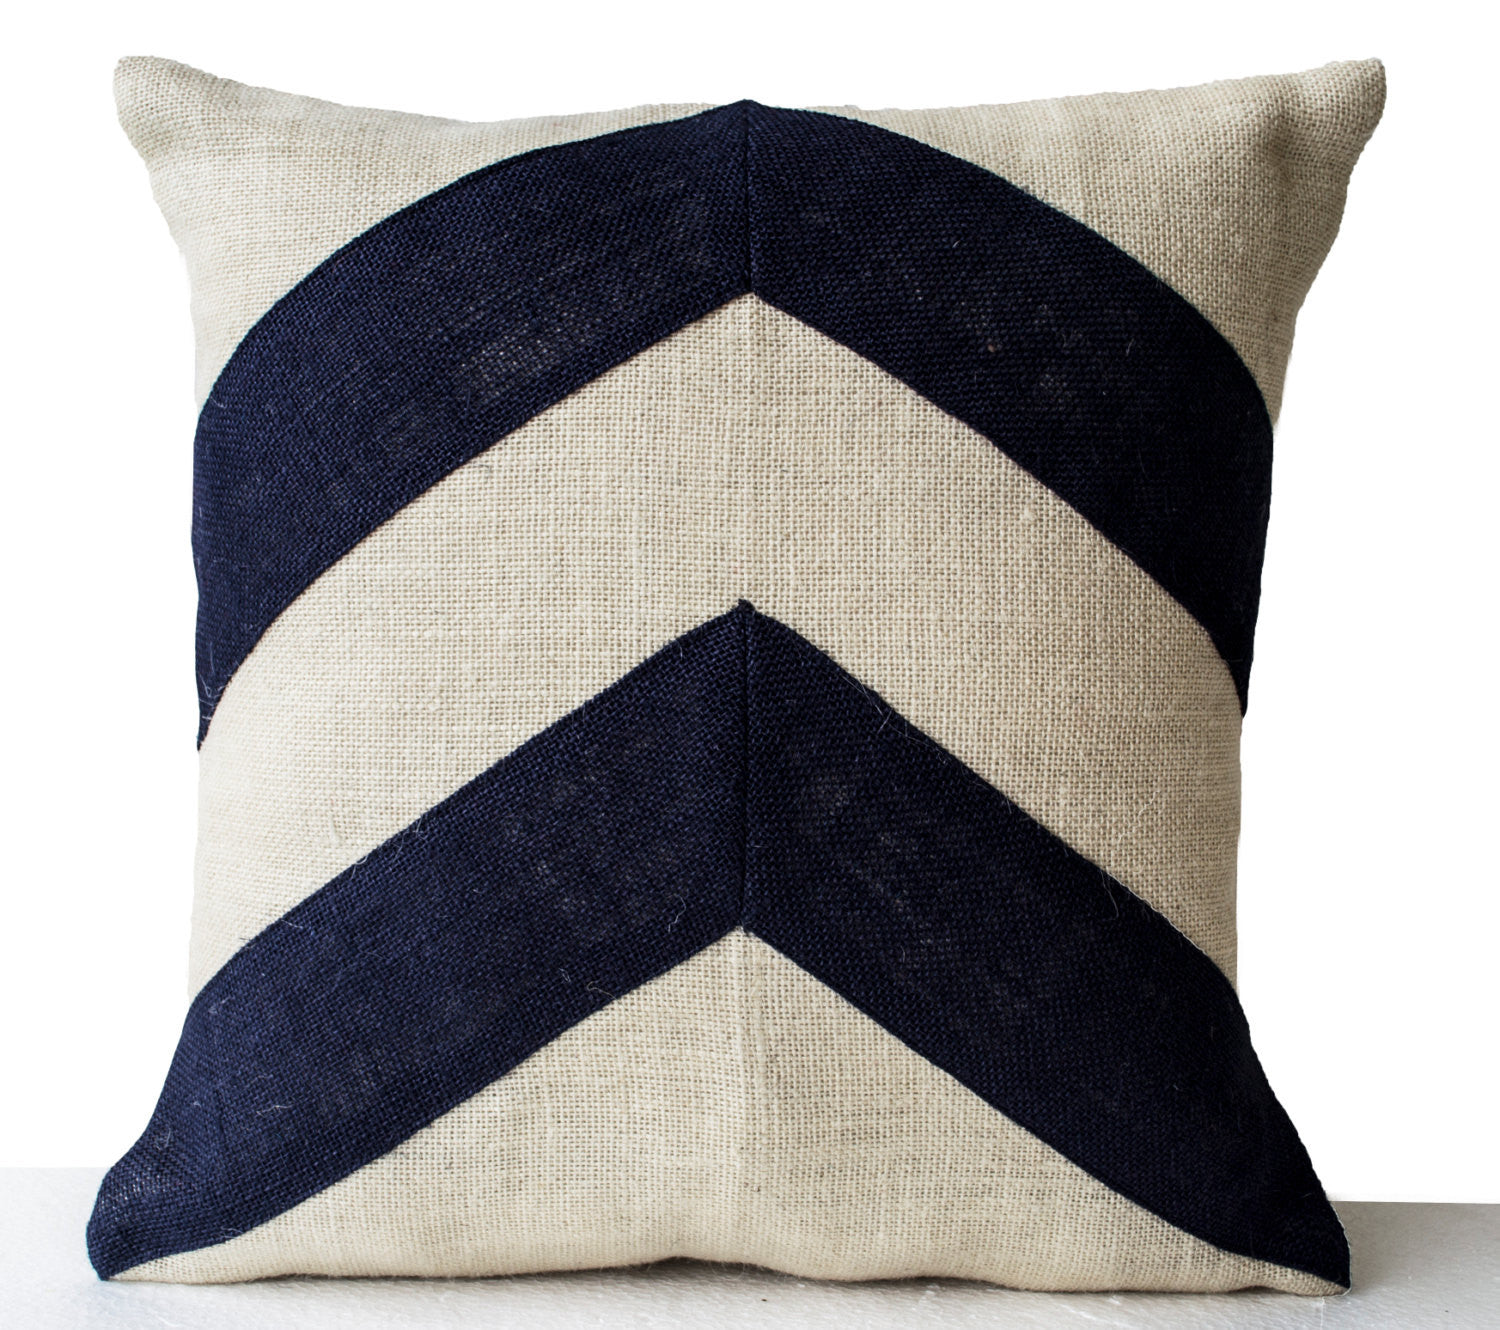 Handmade ivory black pillow cover with geometric pattern